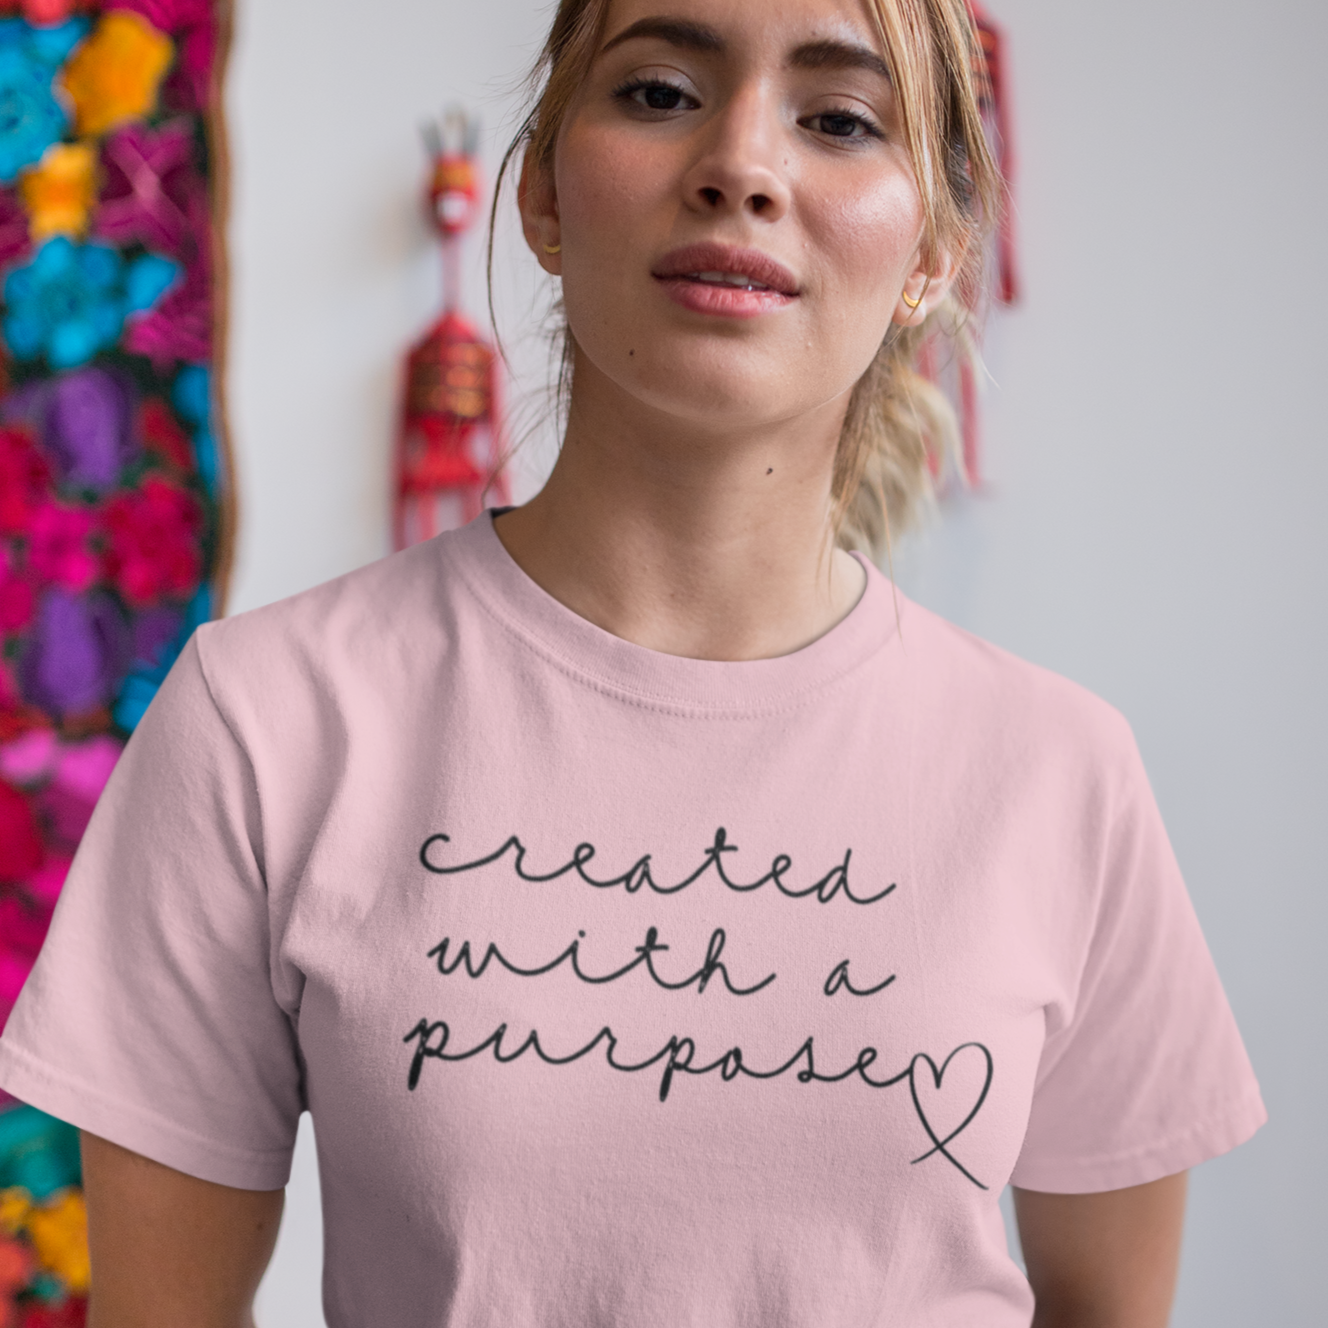 created-with-a-purpose-mockup-of-a-casual-cool-girl-wearing-a-pink-t-shirt